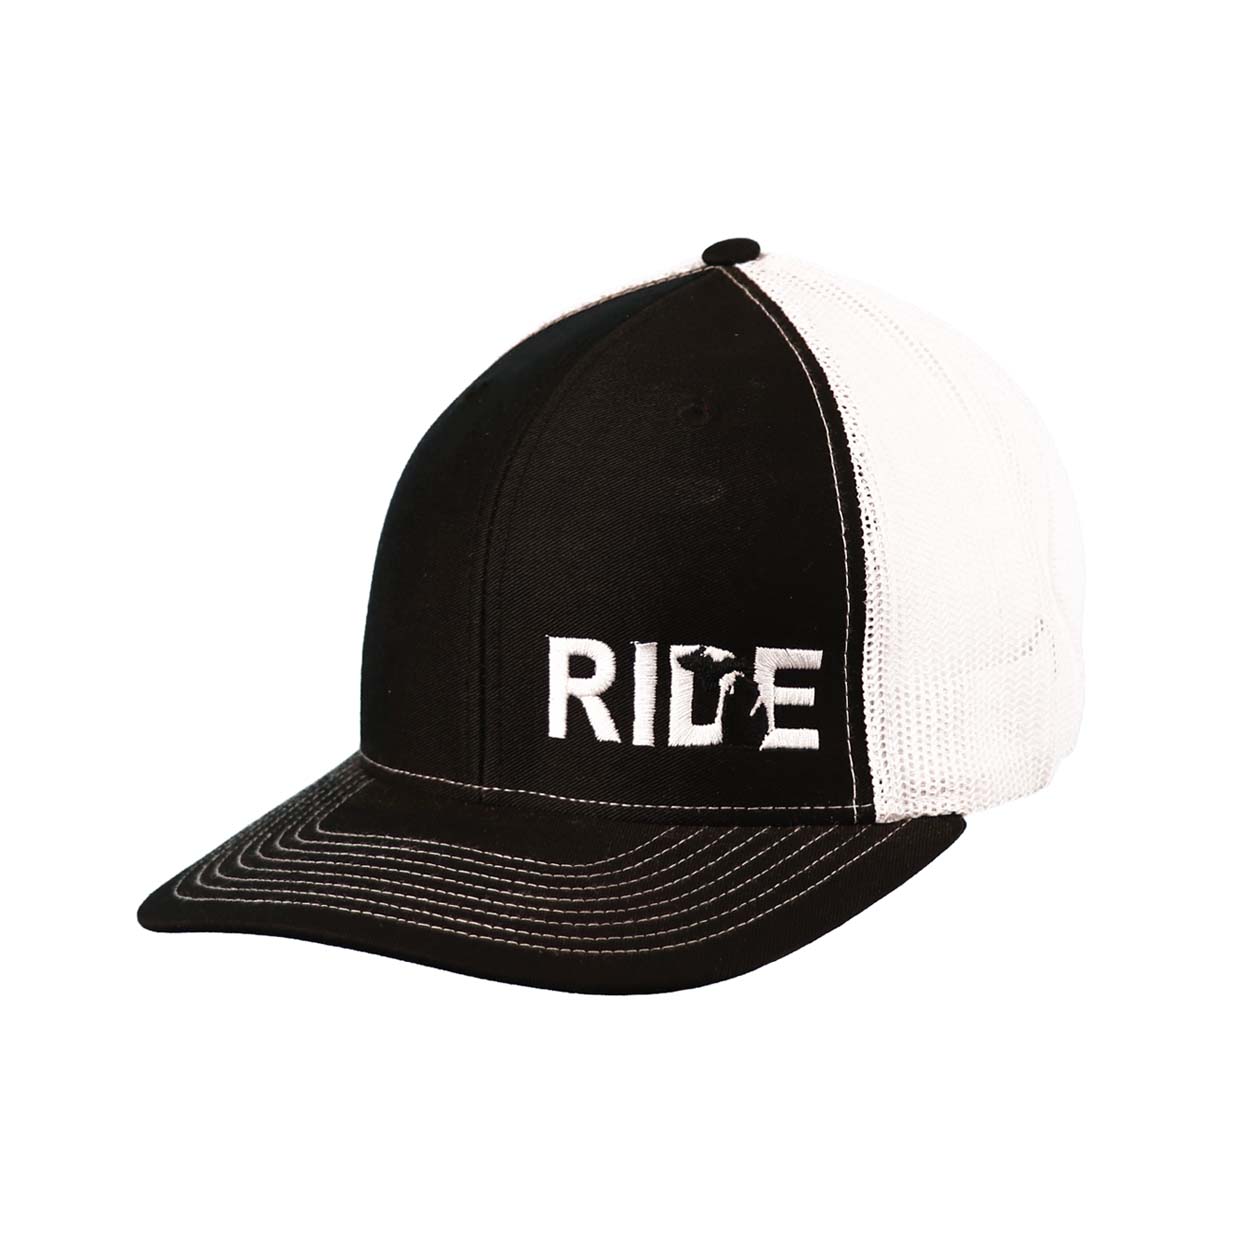 Ride Michigan Night Out Pro Embroidered Snapback Trucker Hat Black/White